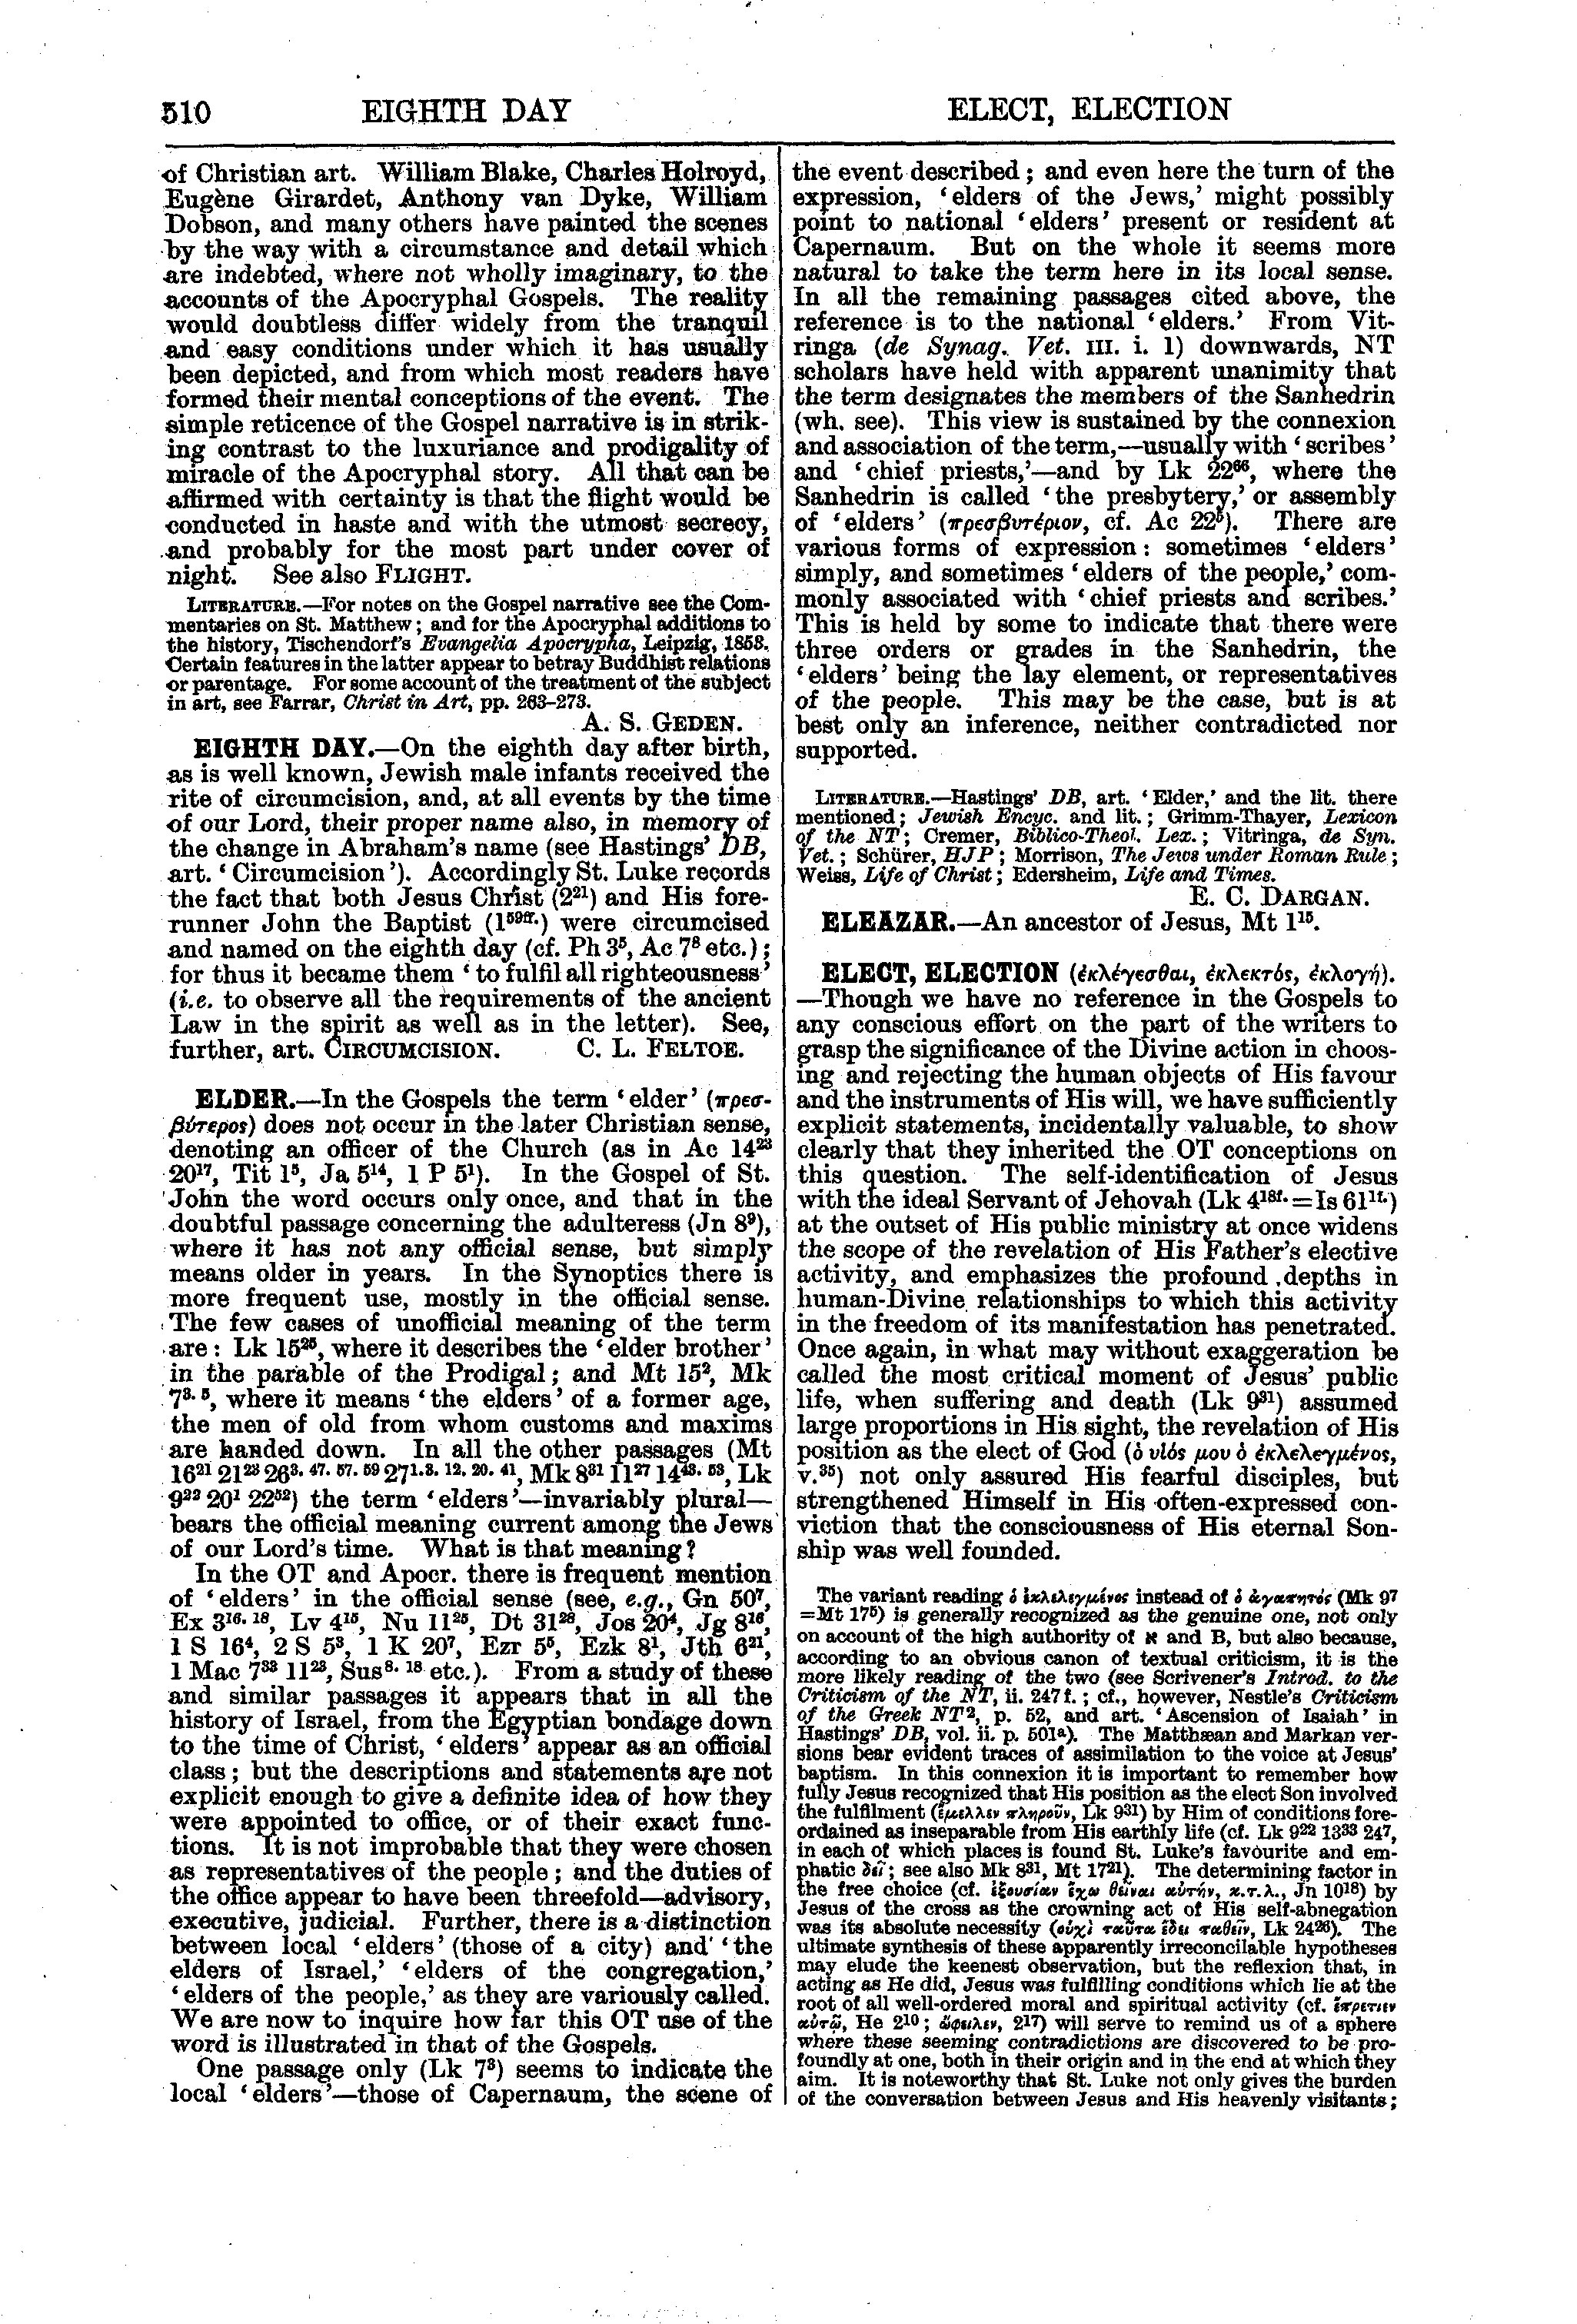 Image of page 510